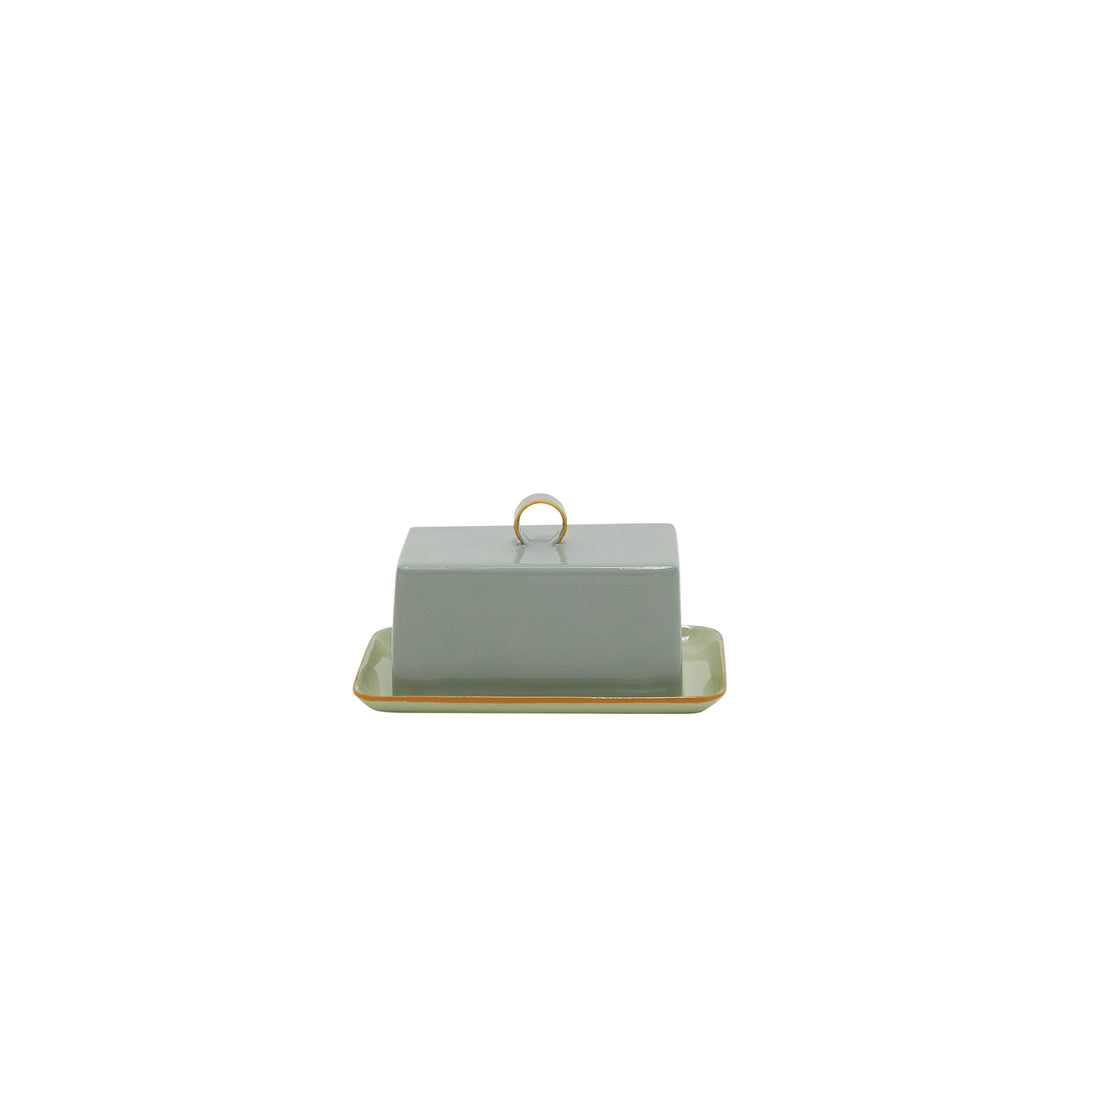 HARLOW BRIGHT BUTTER DISH